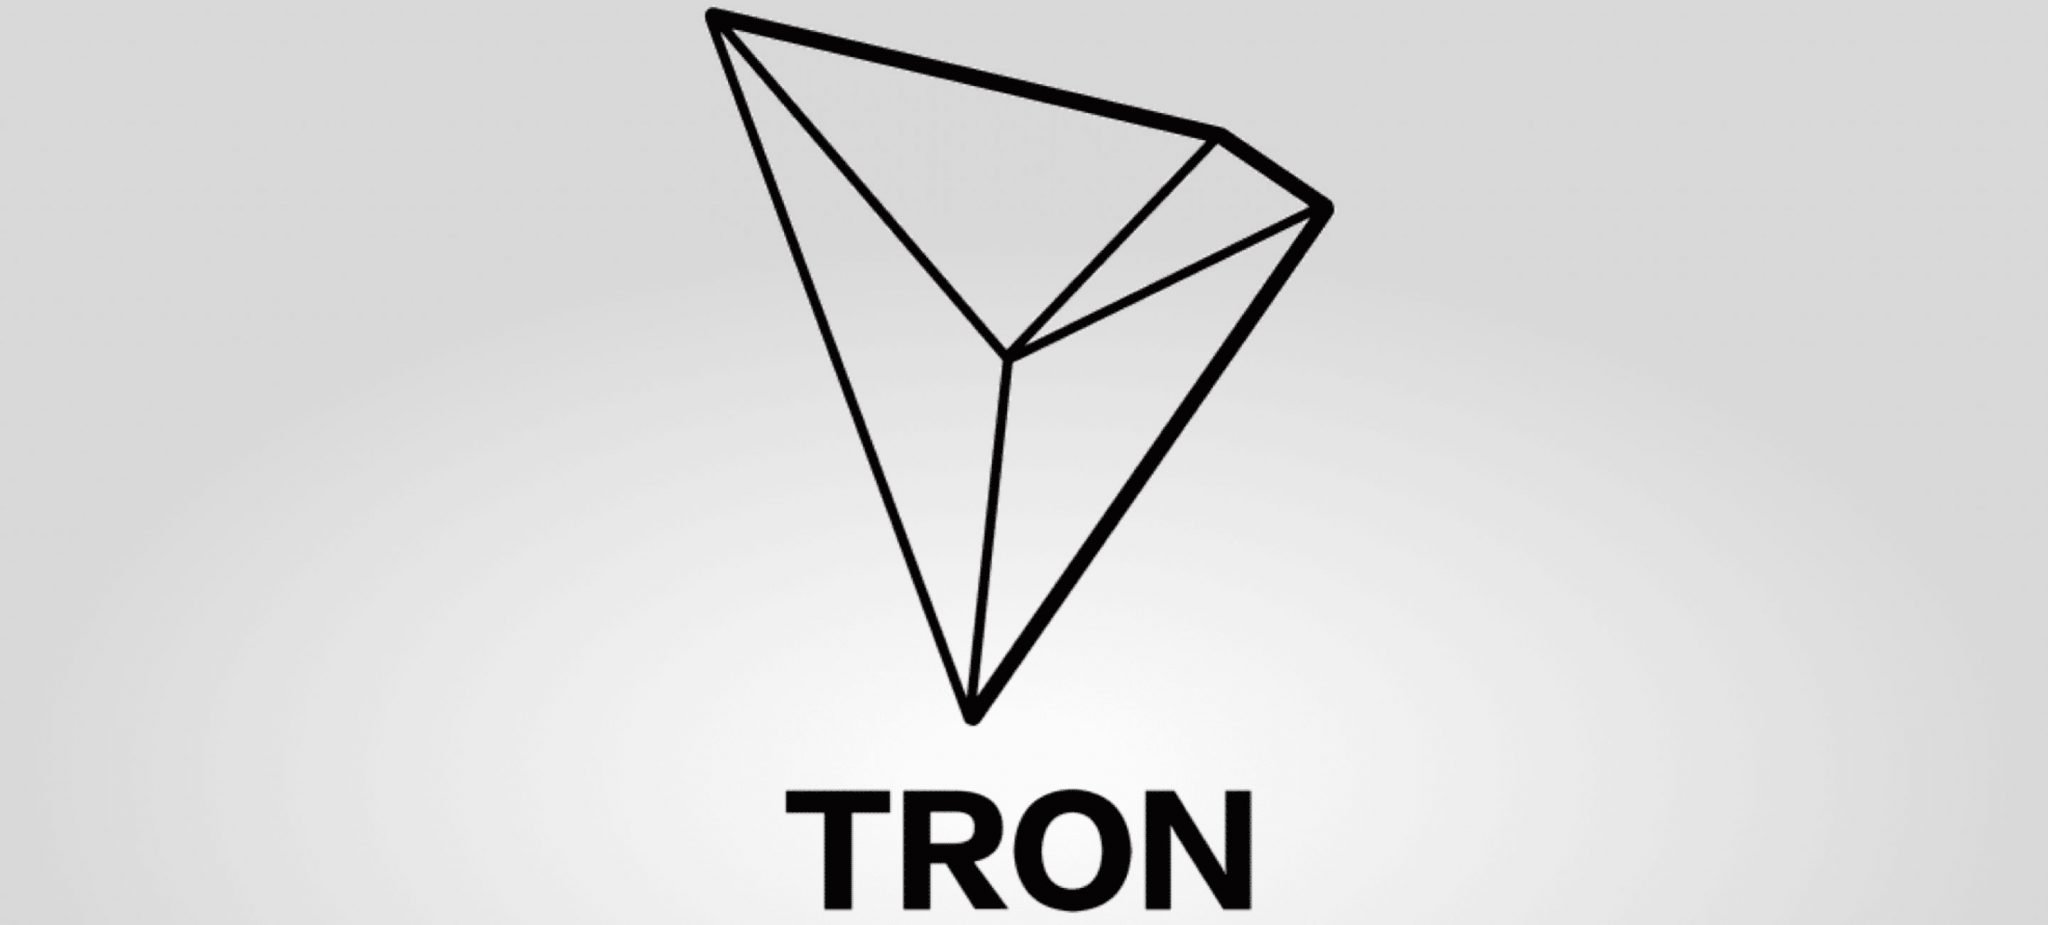 How To Store Tron(TRX) On The Ledger Nano S/X